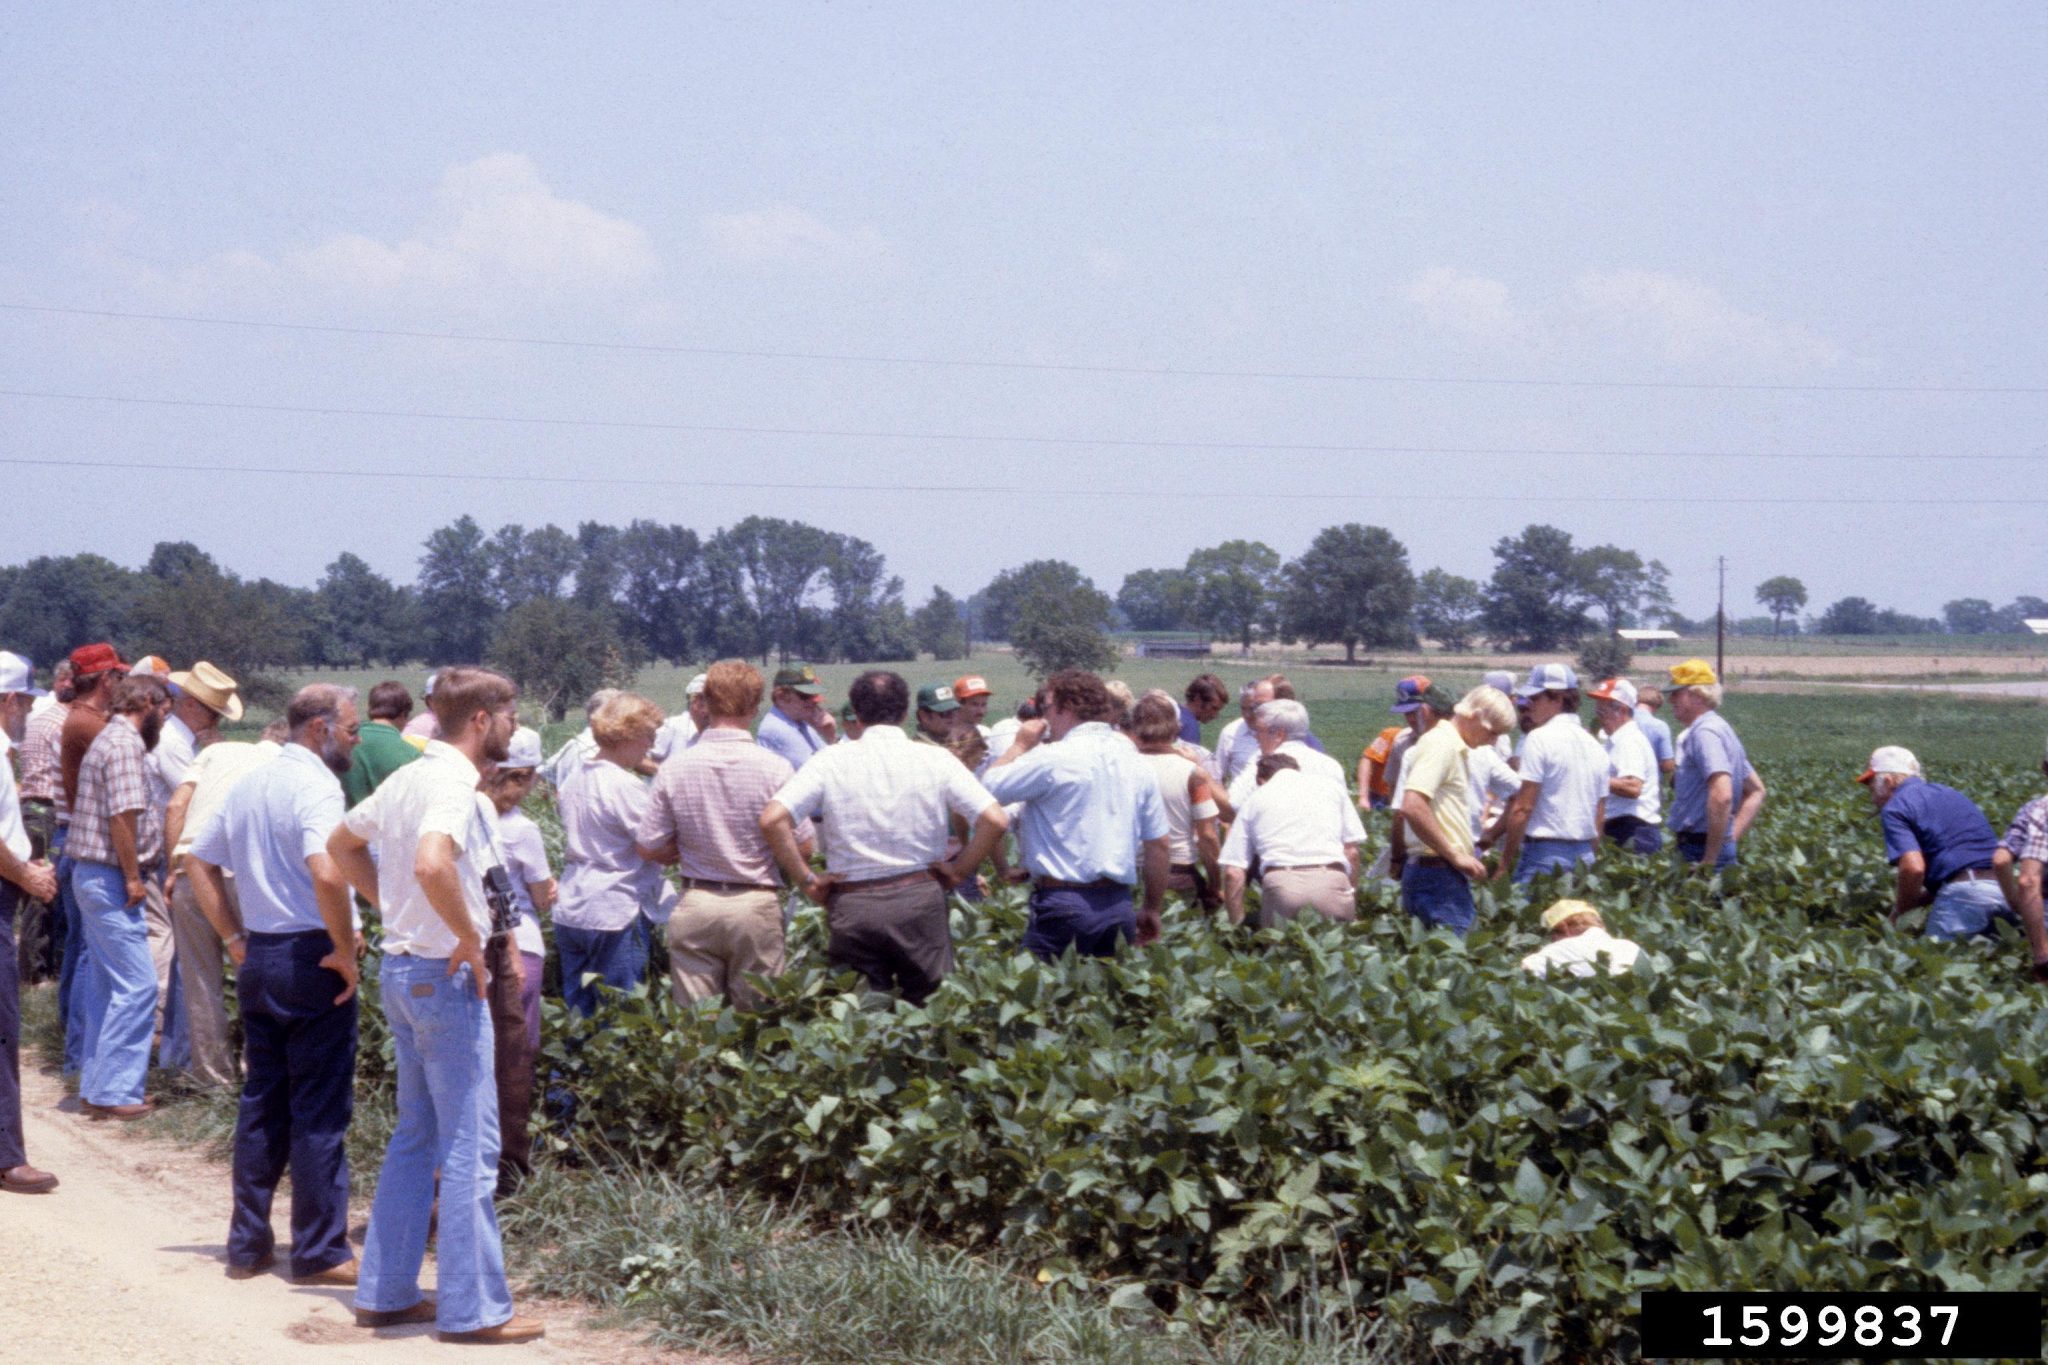 Demonstration in Field - Group of people stading in a soybean field having a class. - John C. French Sr., Retired, Universities:Auburn, GA, Clemson and U of MO, Bugwood.org